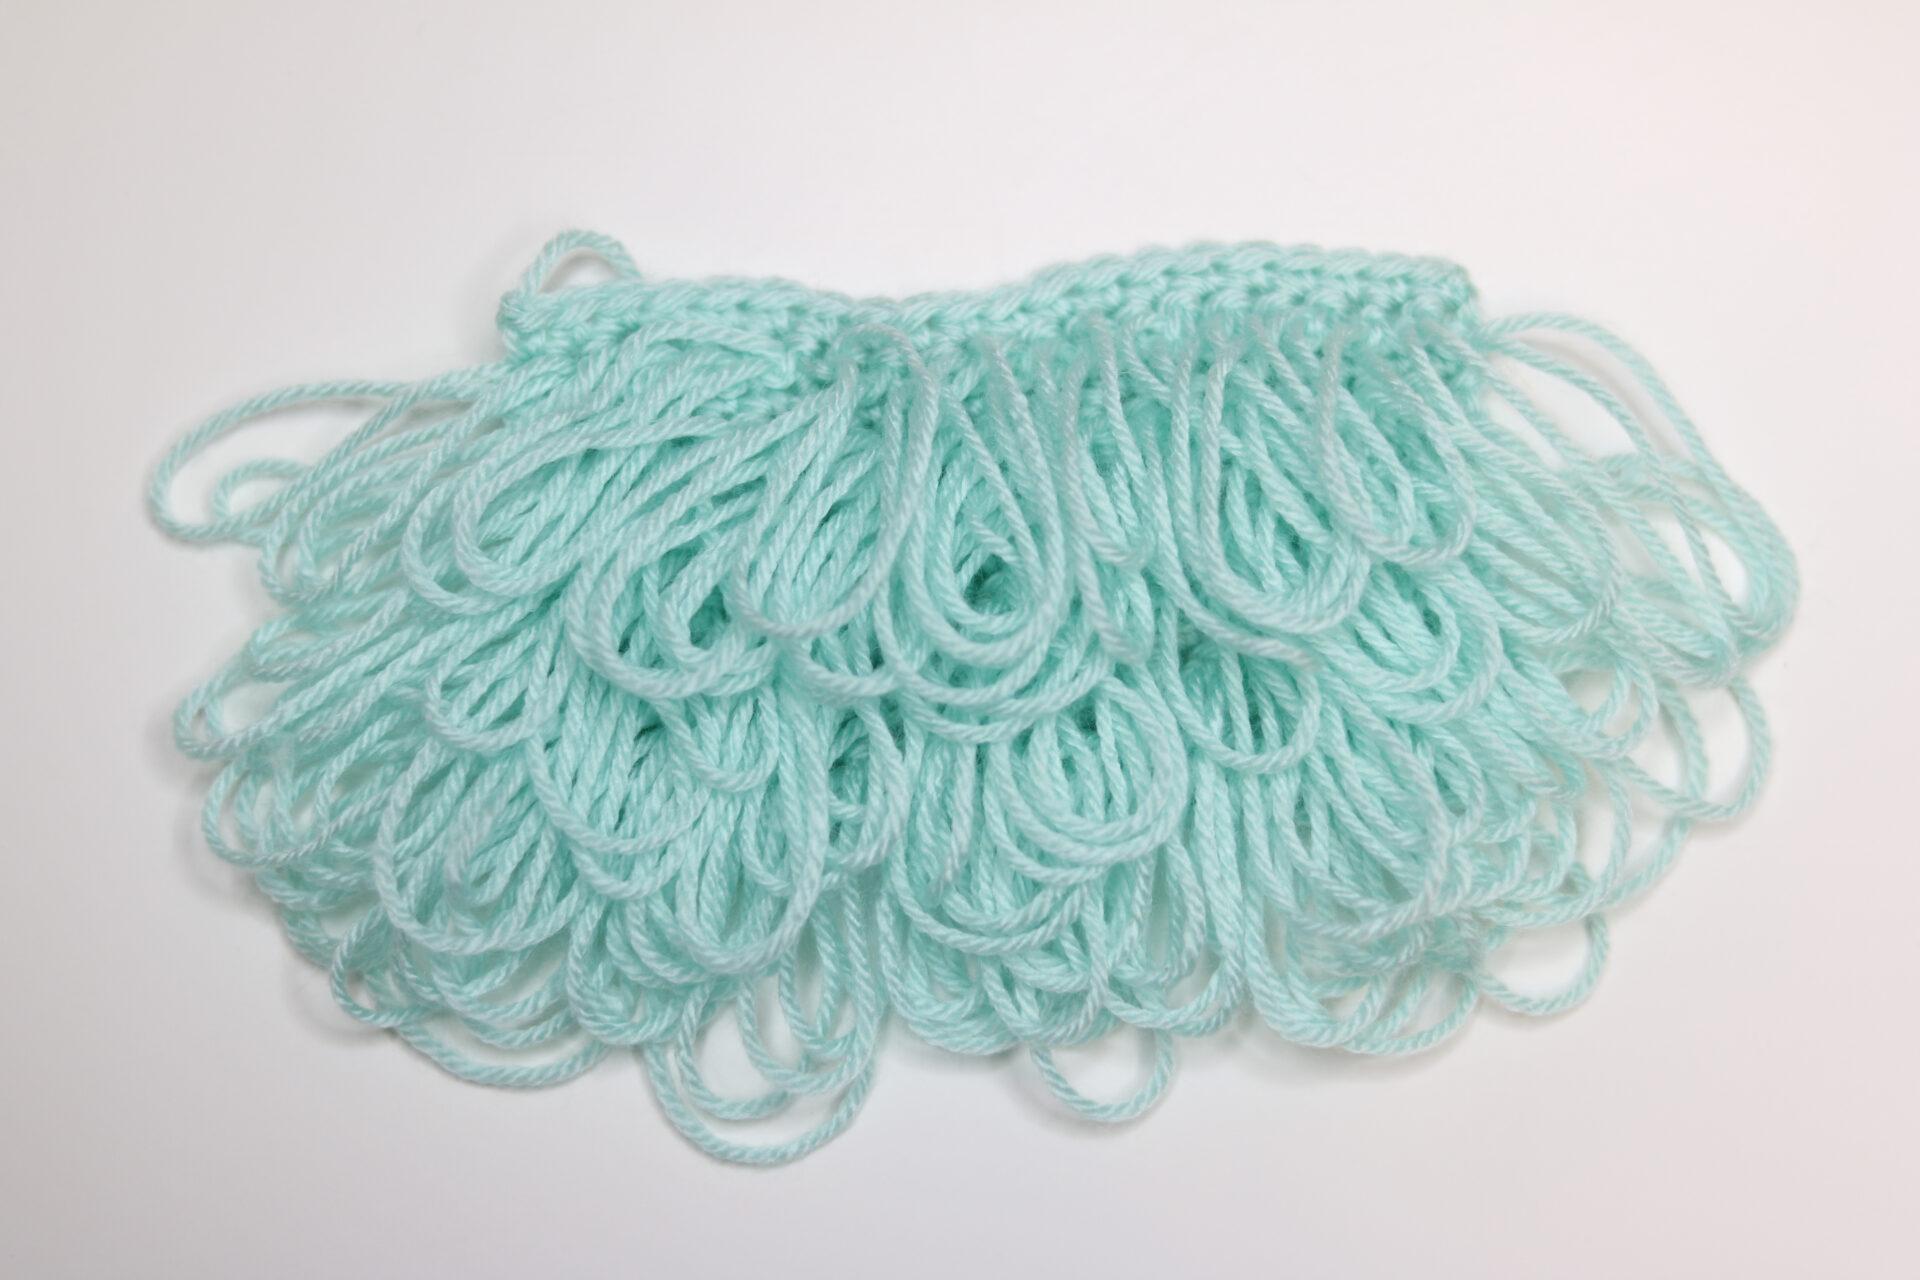 A swatch of loop crochet stitch in aqua yarn sits on a white background. The front is displayed.